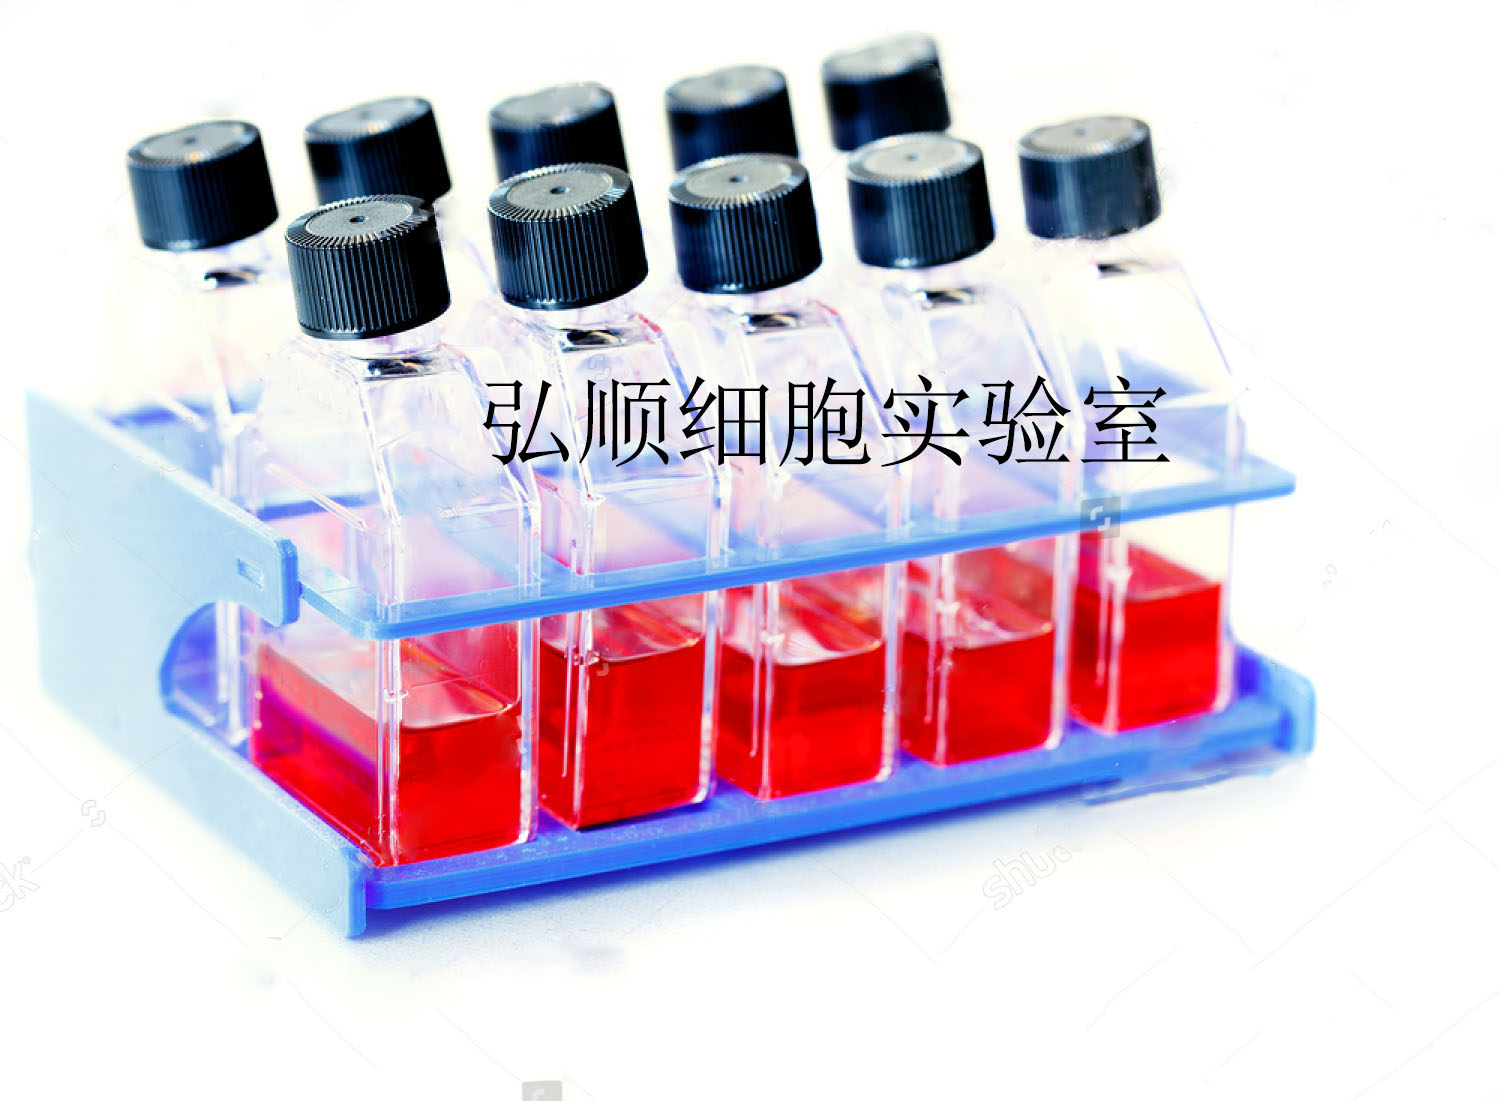 HCFB细胞：人心肌成纤维细胞,HCFB Cell